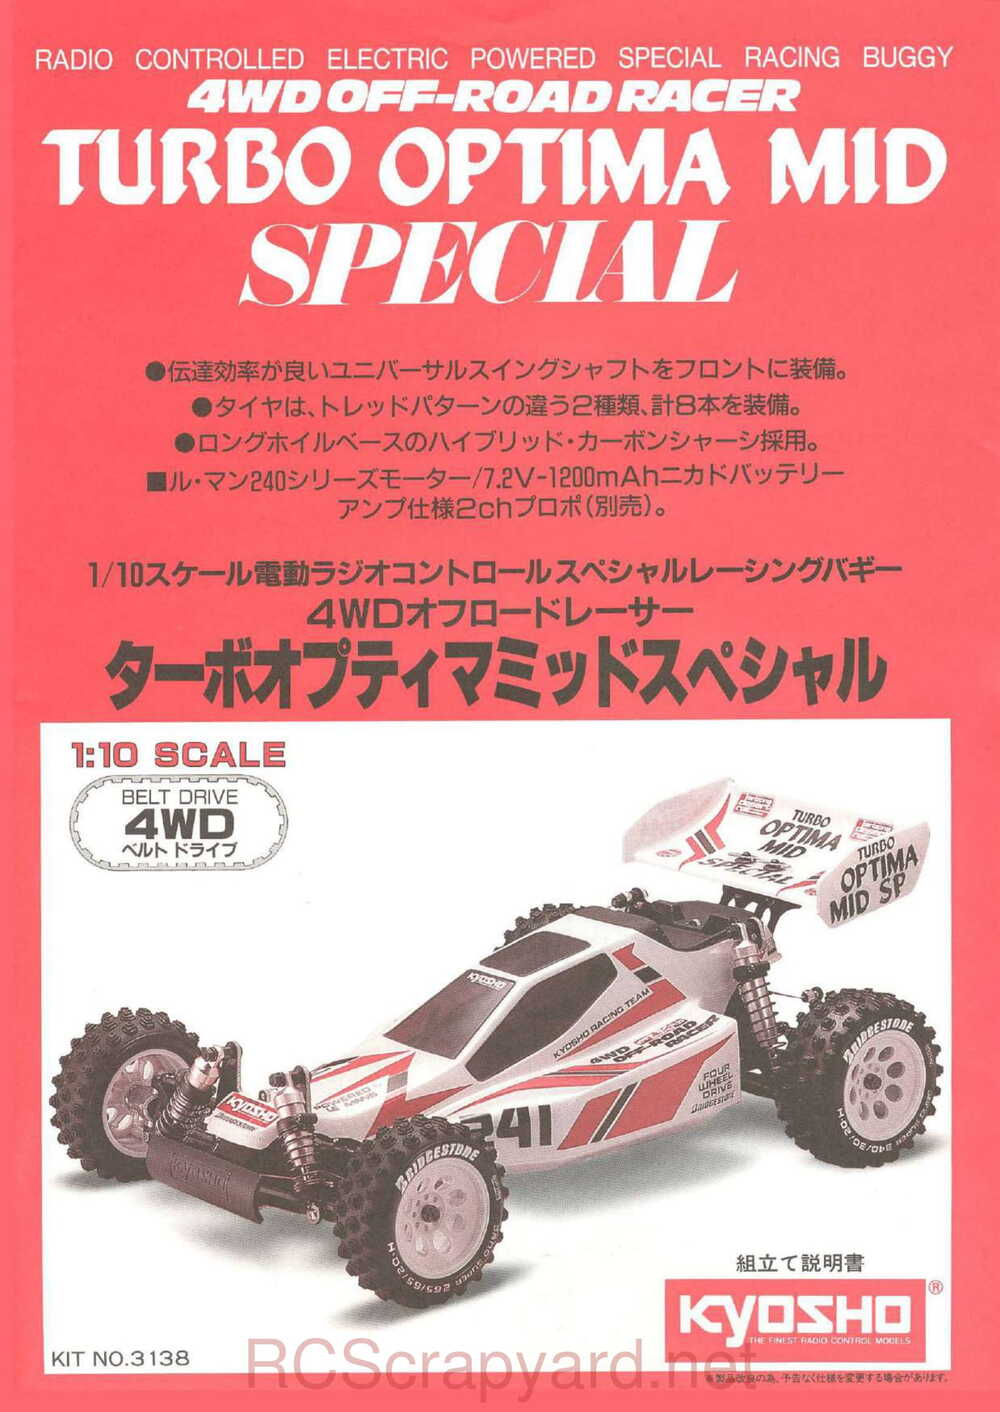 Kyosho - 3138 - Turbo-Optima-Mid-Special - Manual - Page 01